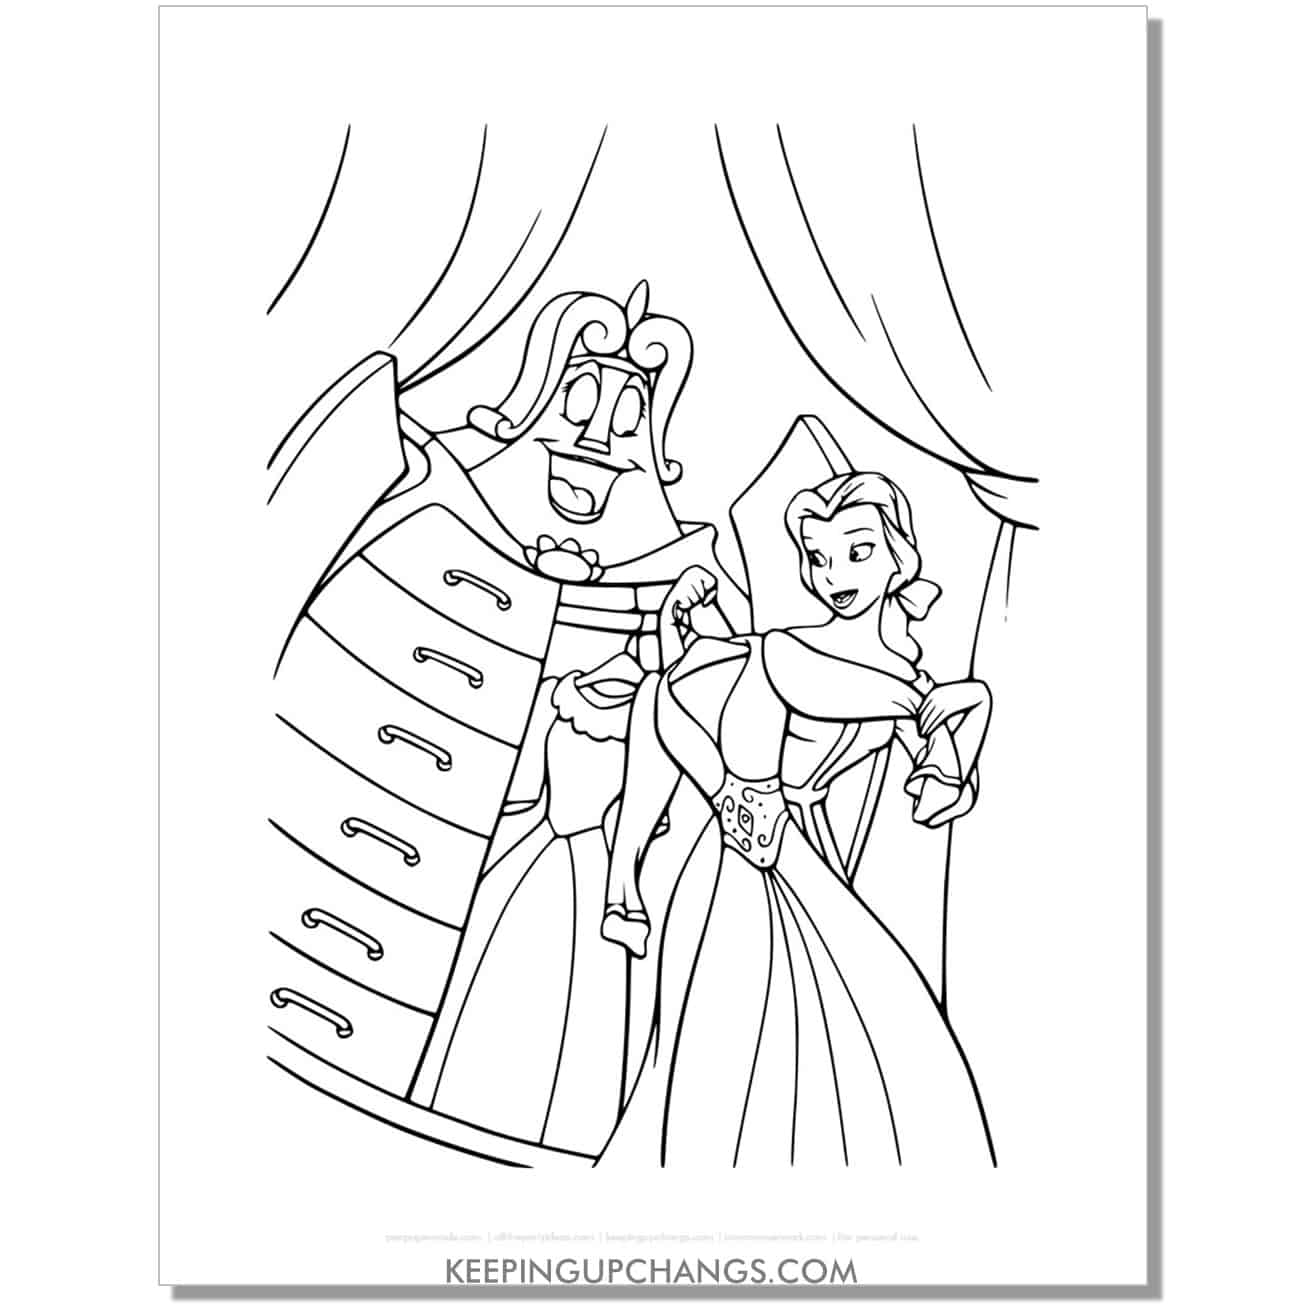 beauty and beast belle tries dress from lady armoire coloring page, sheet.